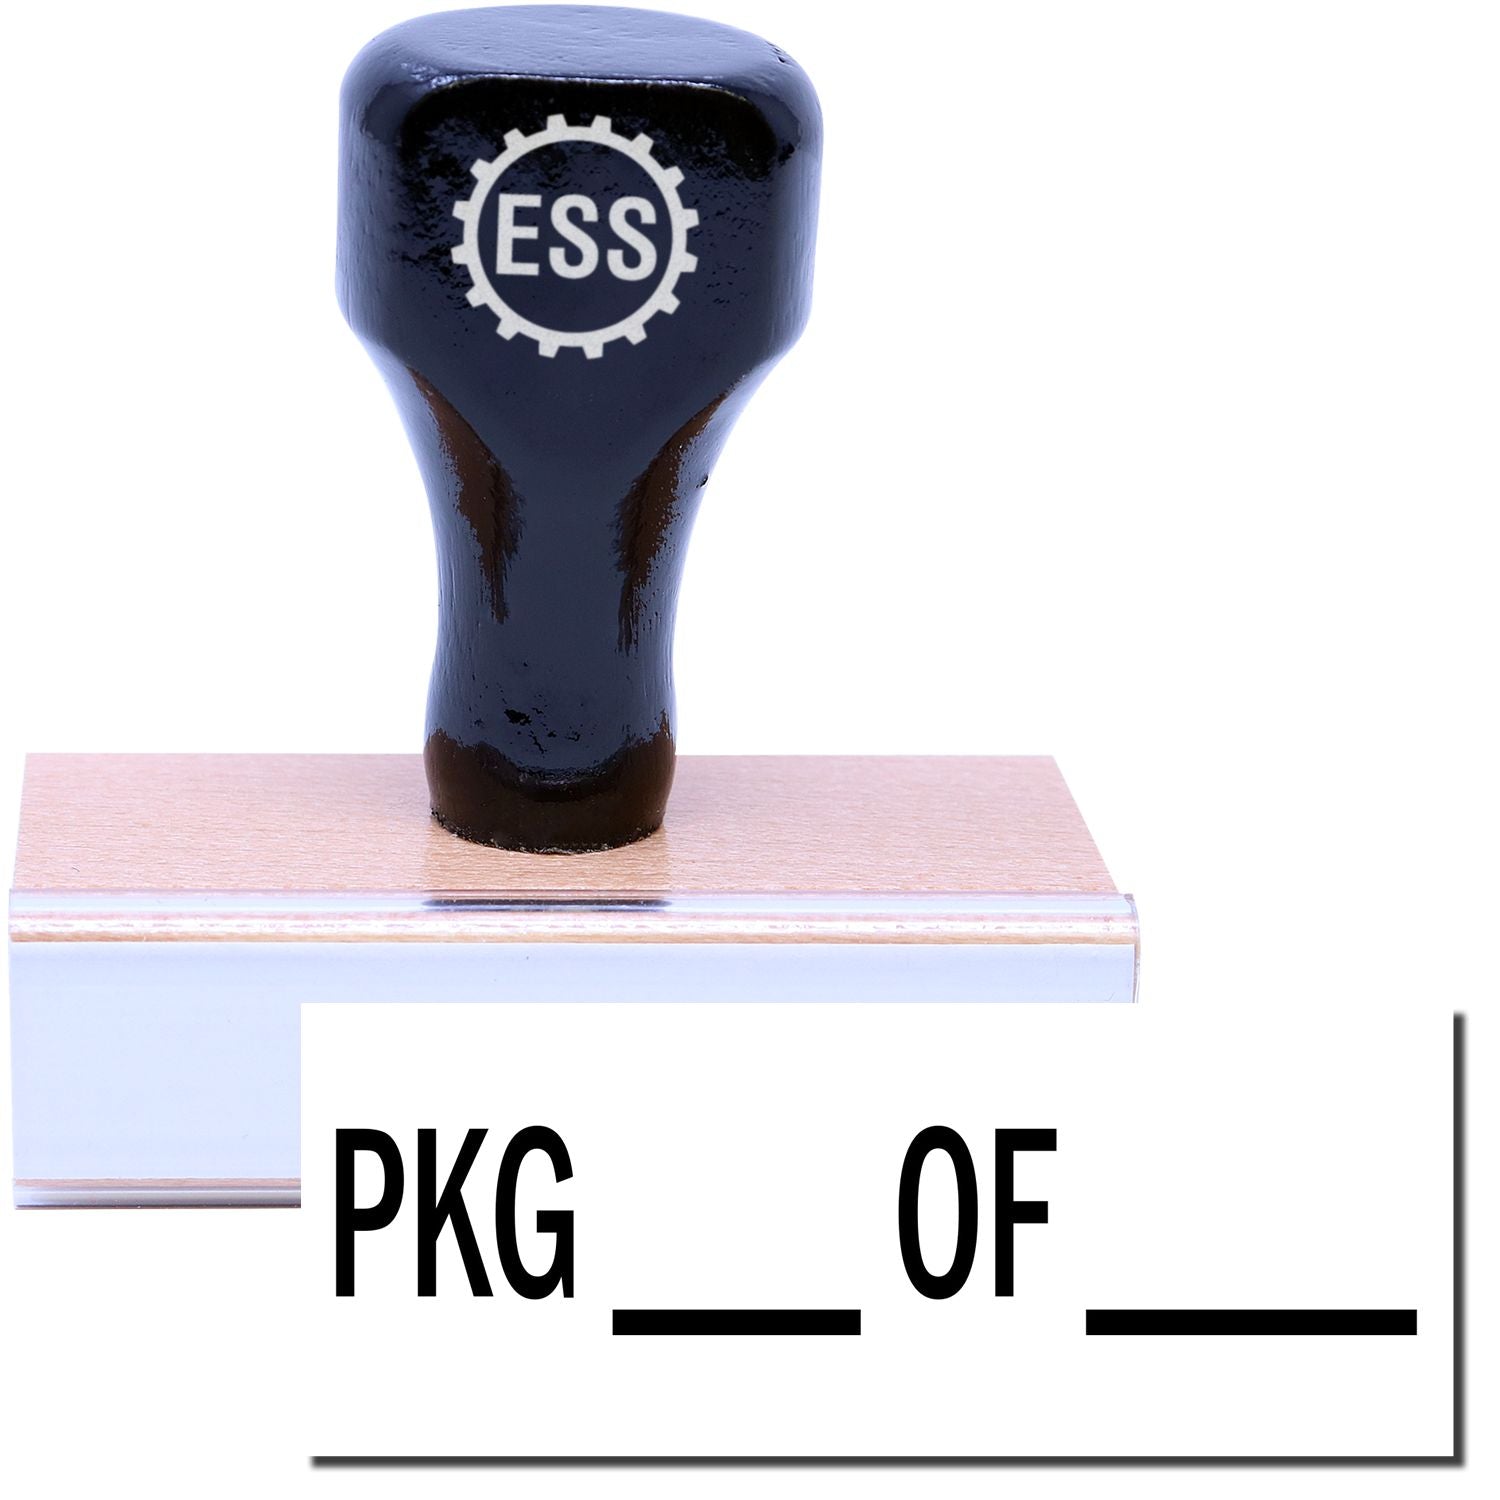 A stock office rubber stamp with a stamped image showing how the text "PKG ___ OF ____" is displayed after stamping.